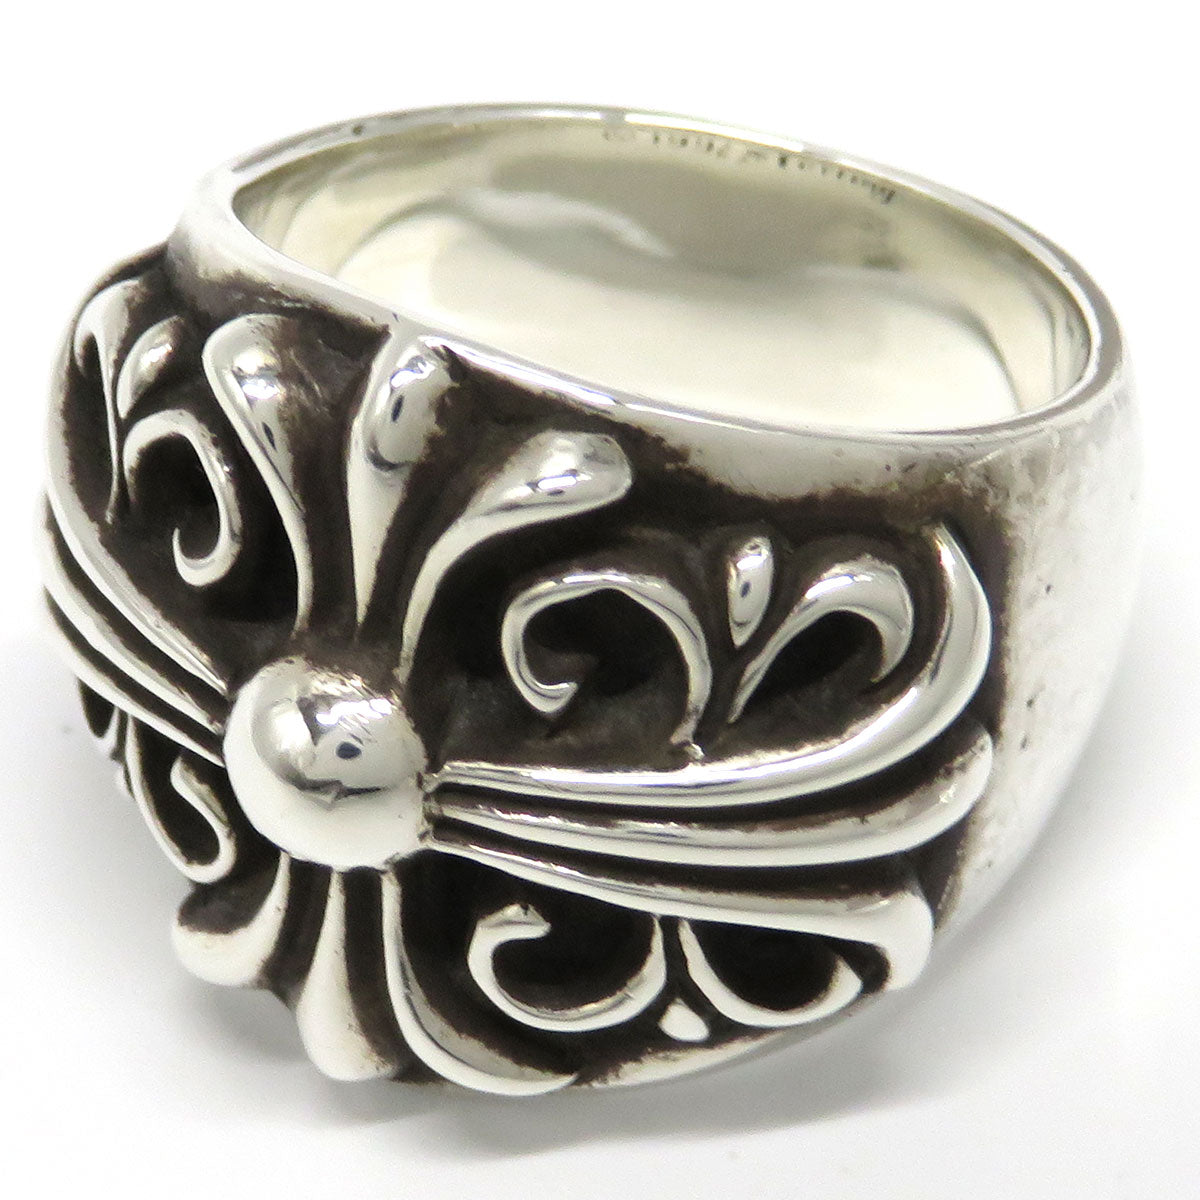 Keeper Ring